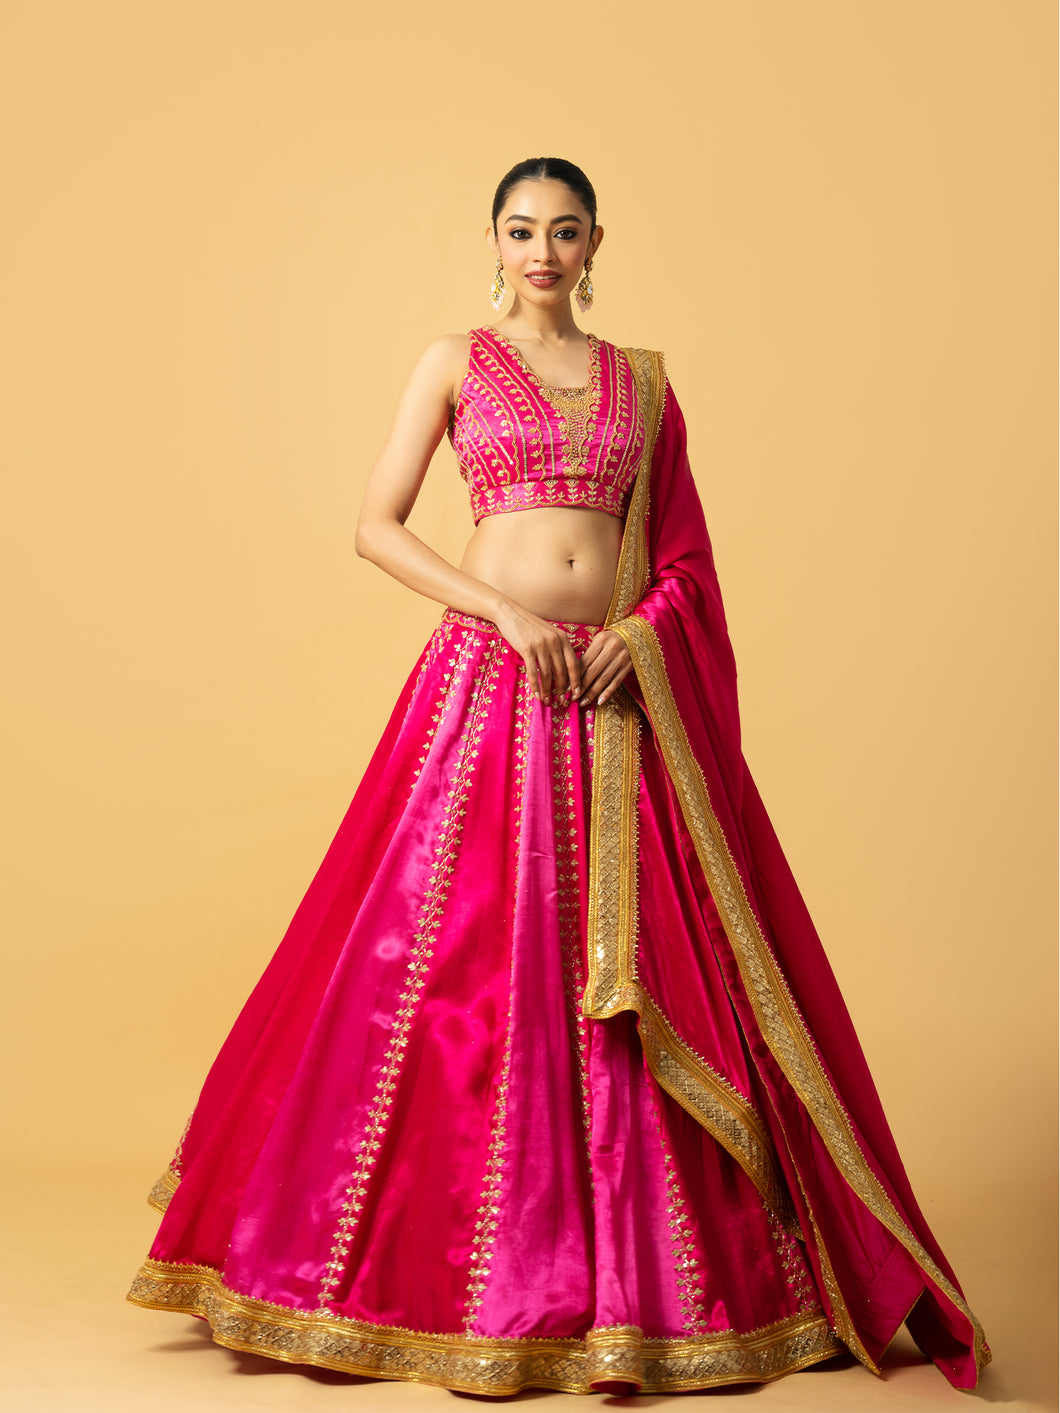 Pink Ombre modal satin lehenga with hand embroidered work and lace on dupatta